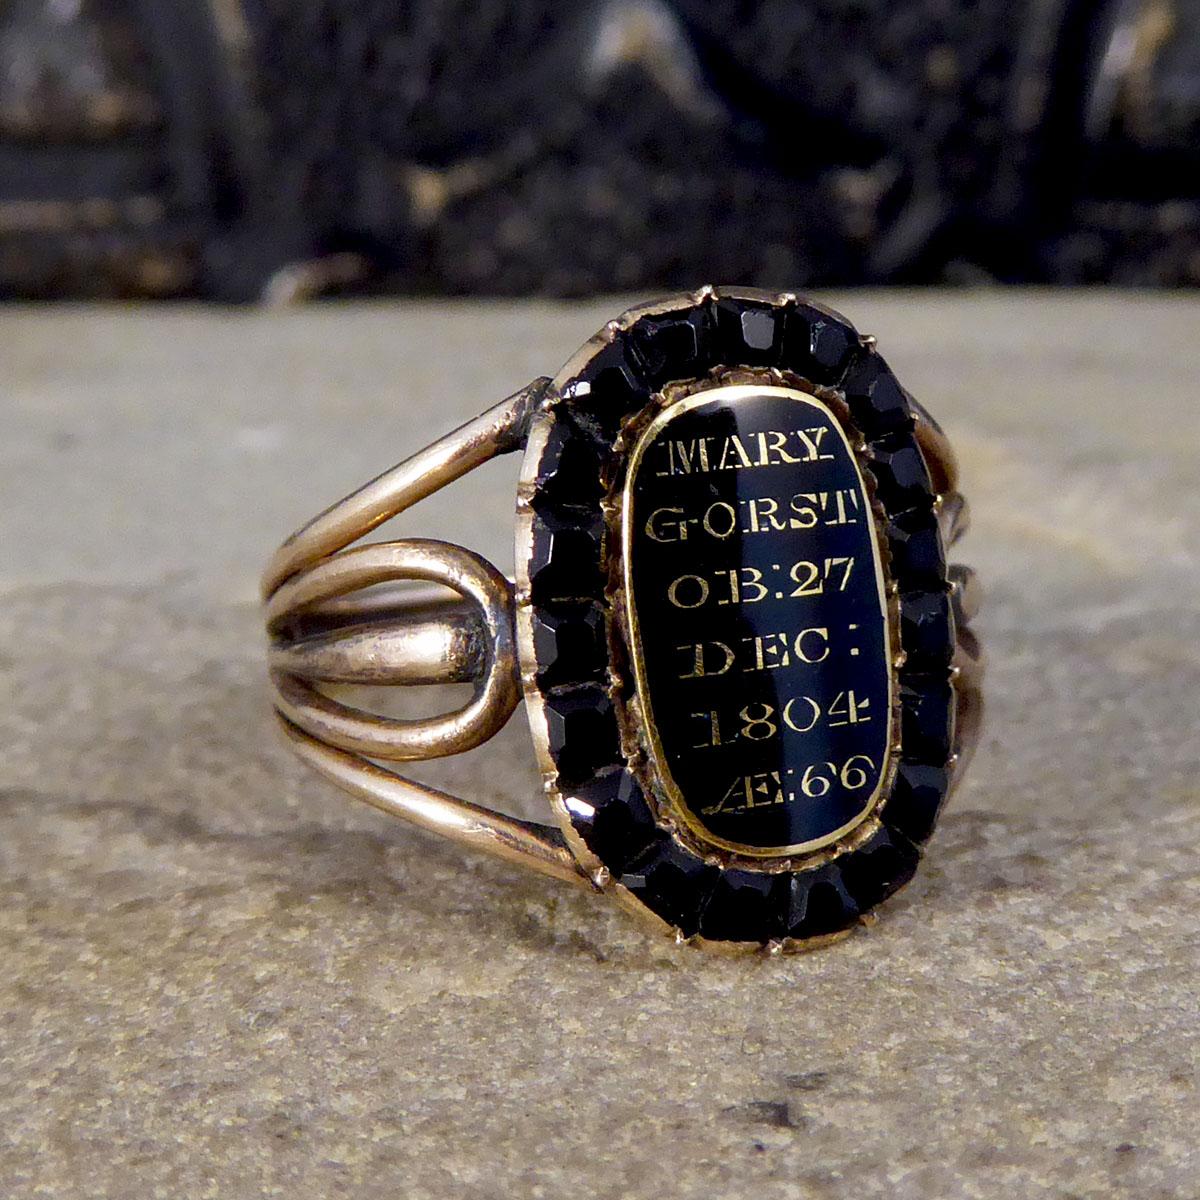 This ring is such a beautiful example of an antique mourning ring that was hand crafted in the Late Georgian era. Mourning Rings were commonly made in the event of a death in the family in the Georgian era, marked with black mofits, initials and